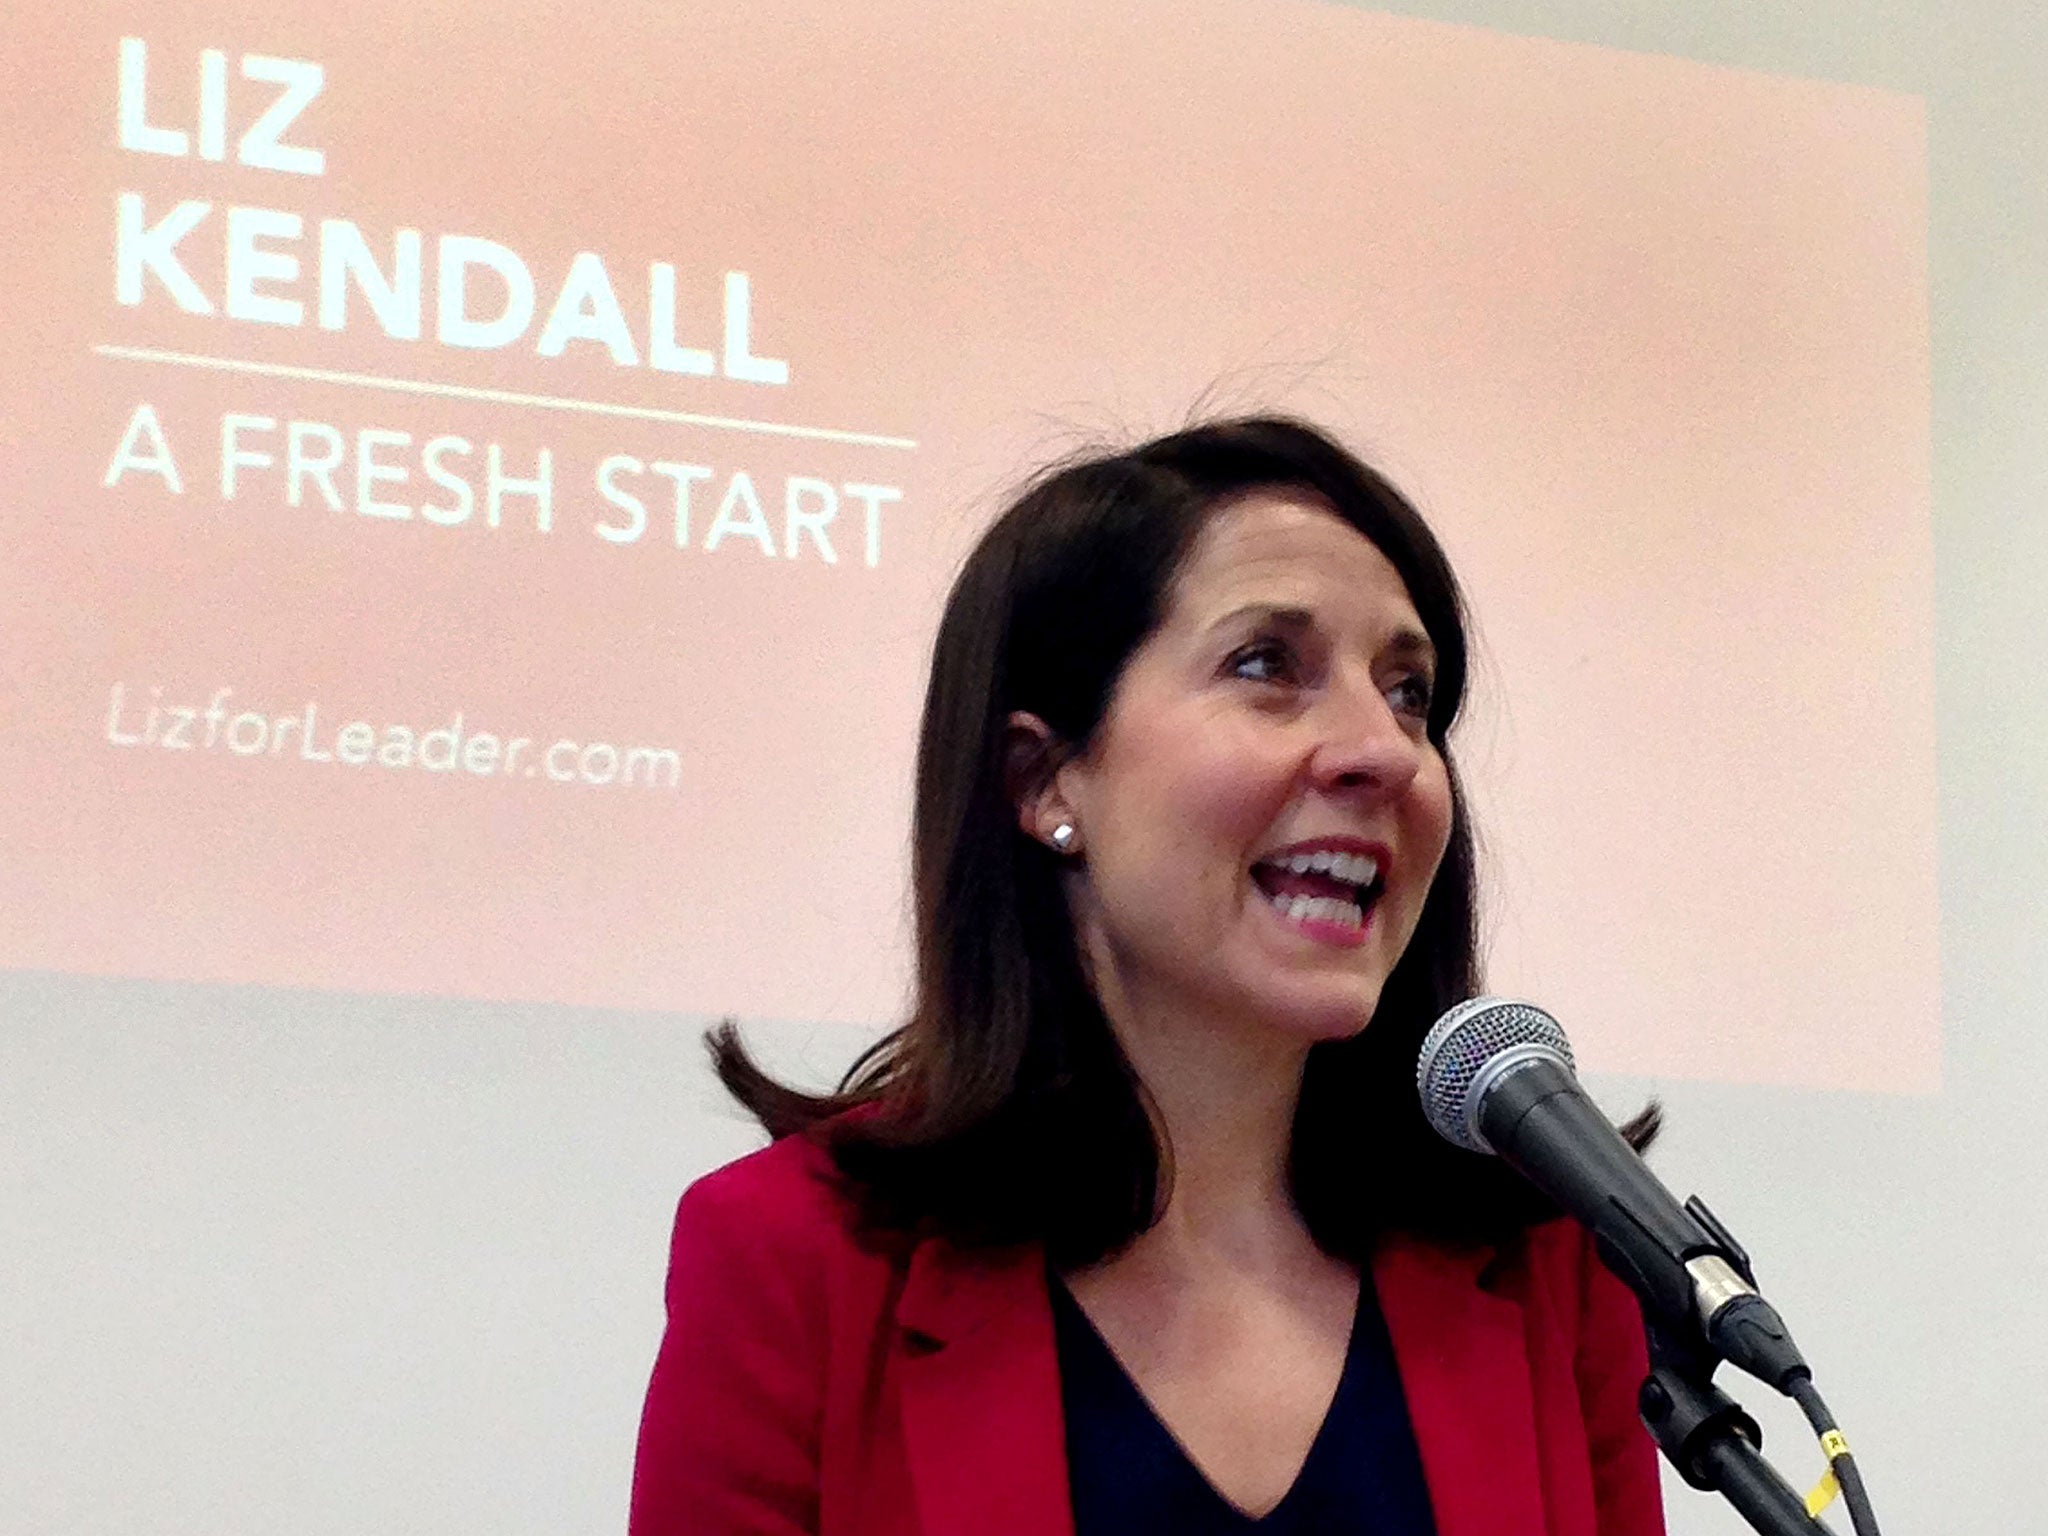 Labour leader contender Liz Kendall speaks at De Montfort University Leicester, where she made a pitch for party votes in the party's leadership contest